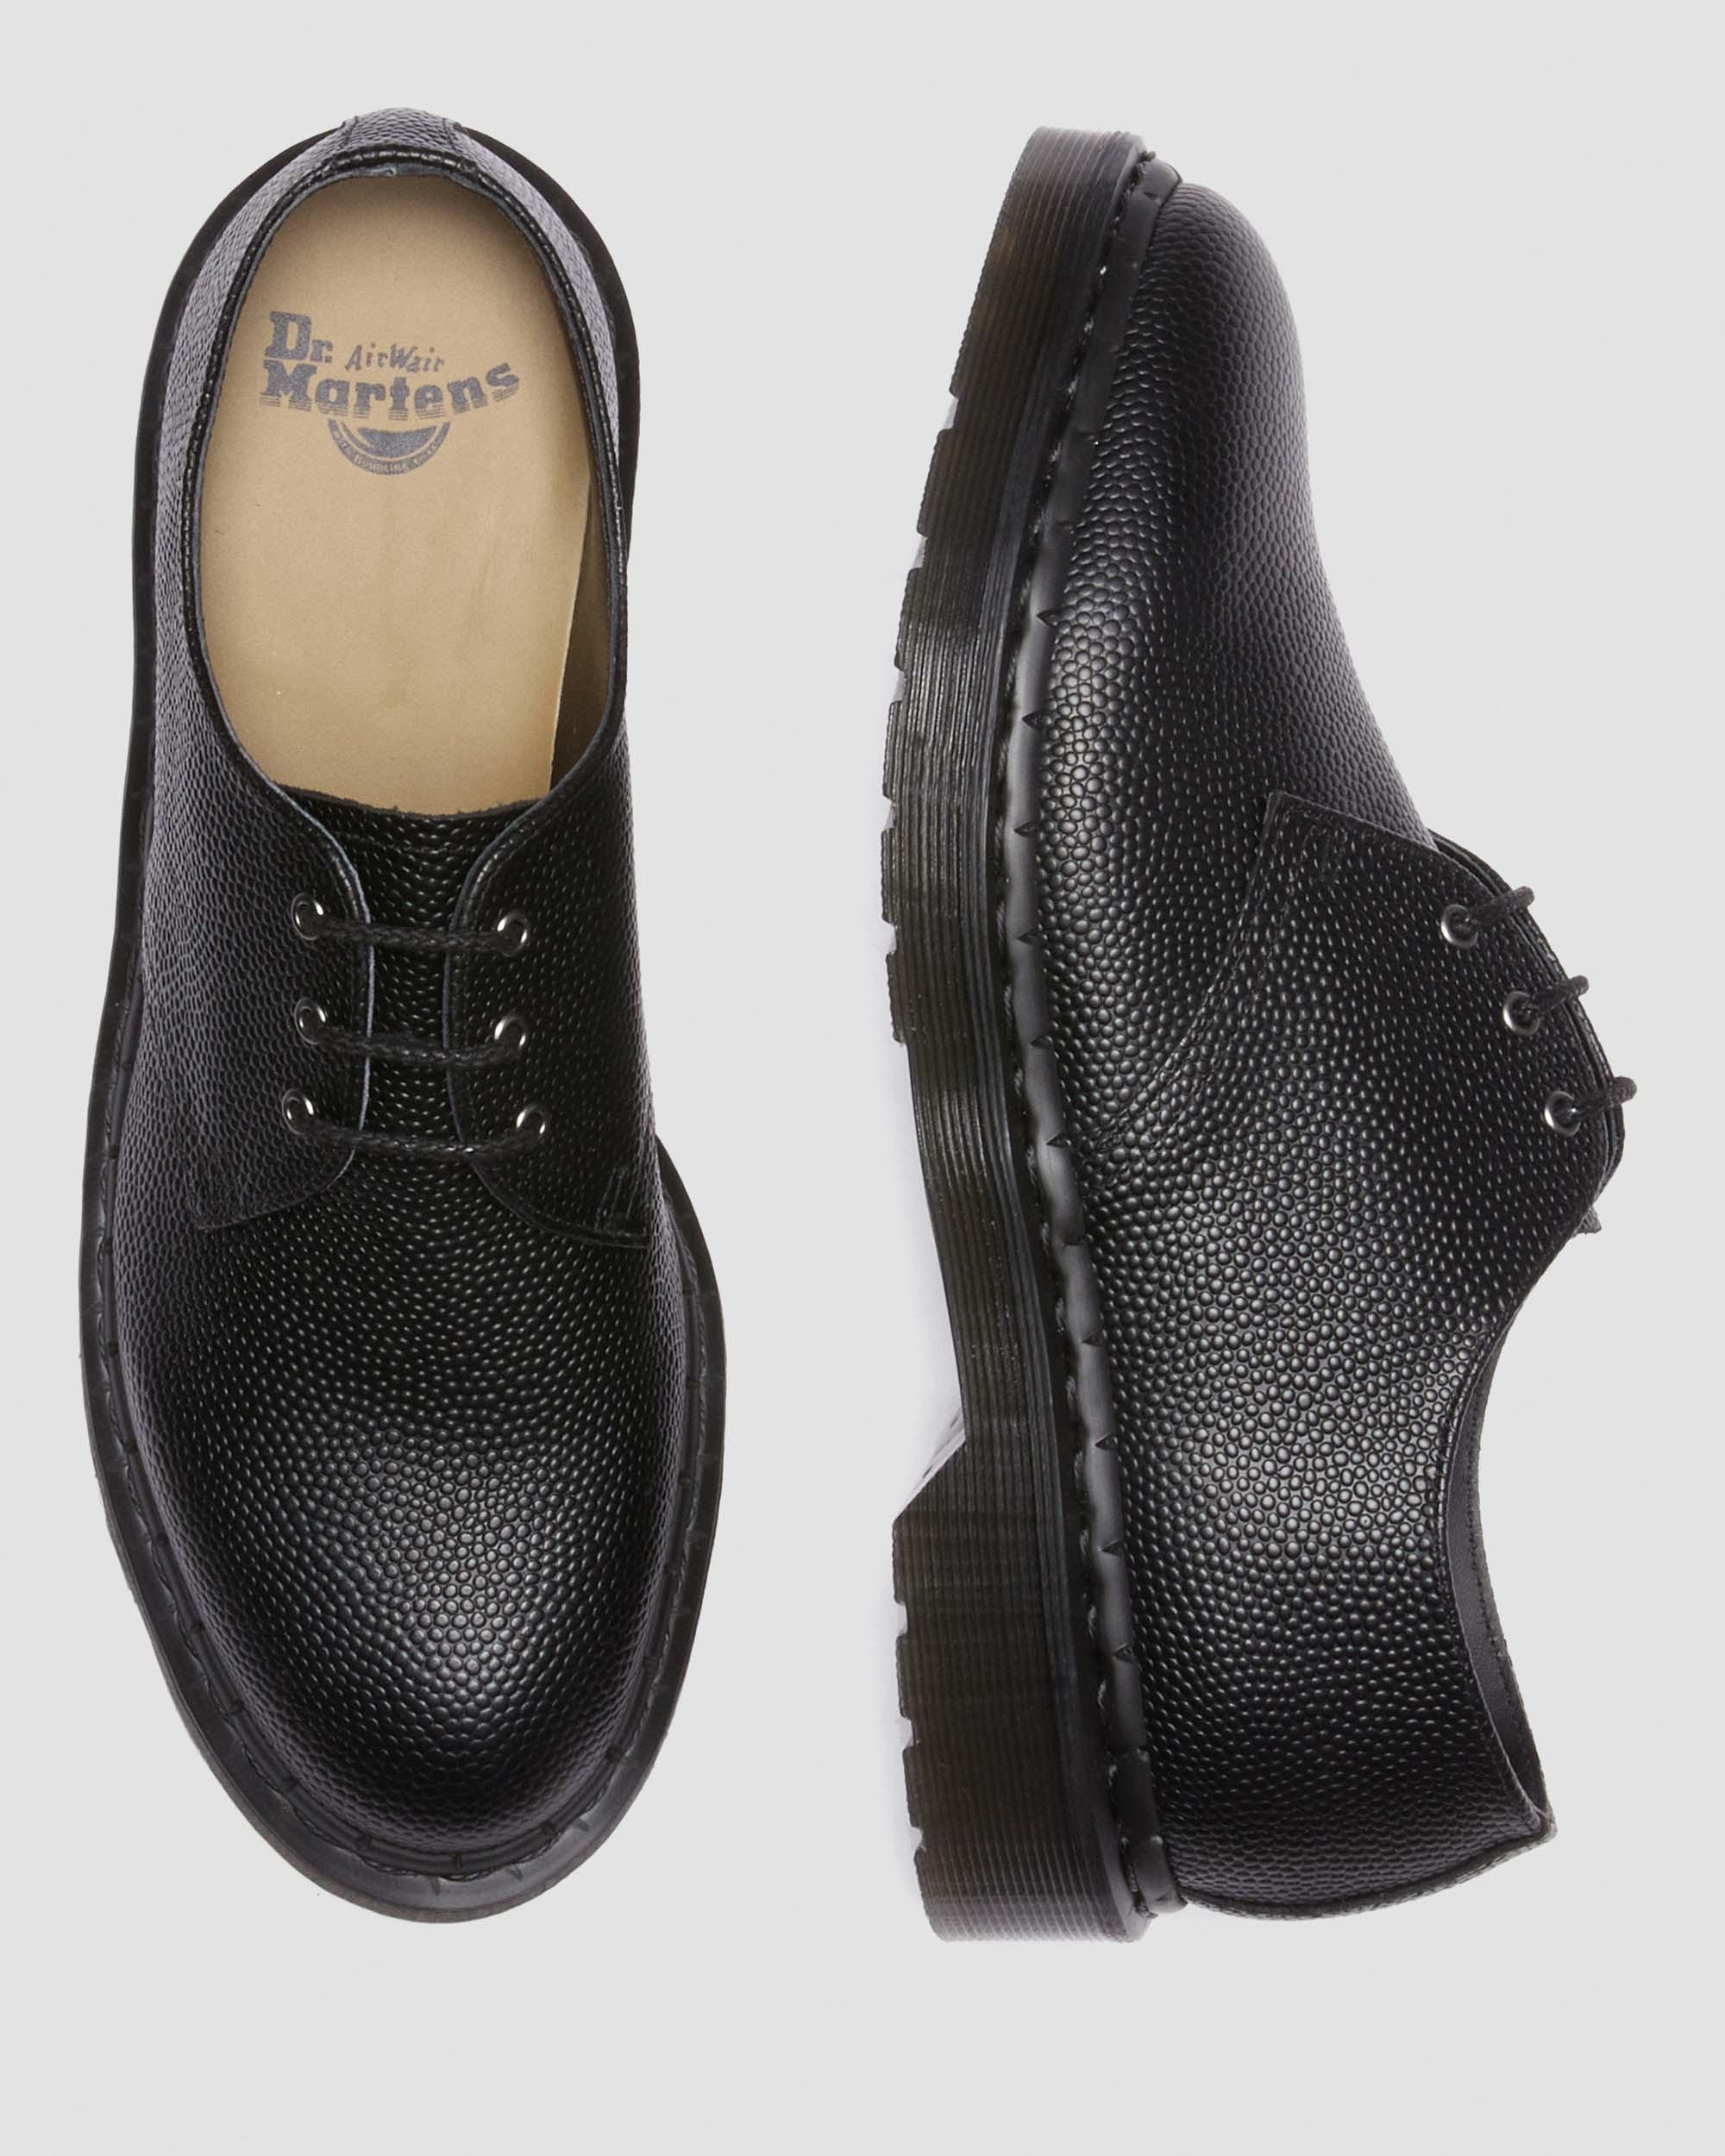 1461 Pebble Grain Leather Oxford Shoes in Black | Dr. Martens